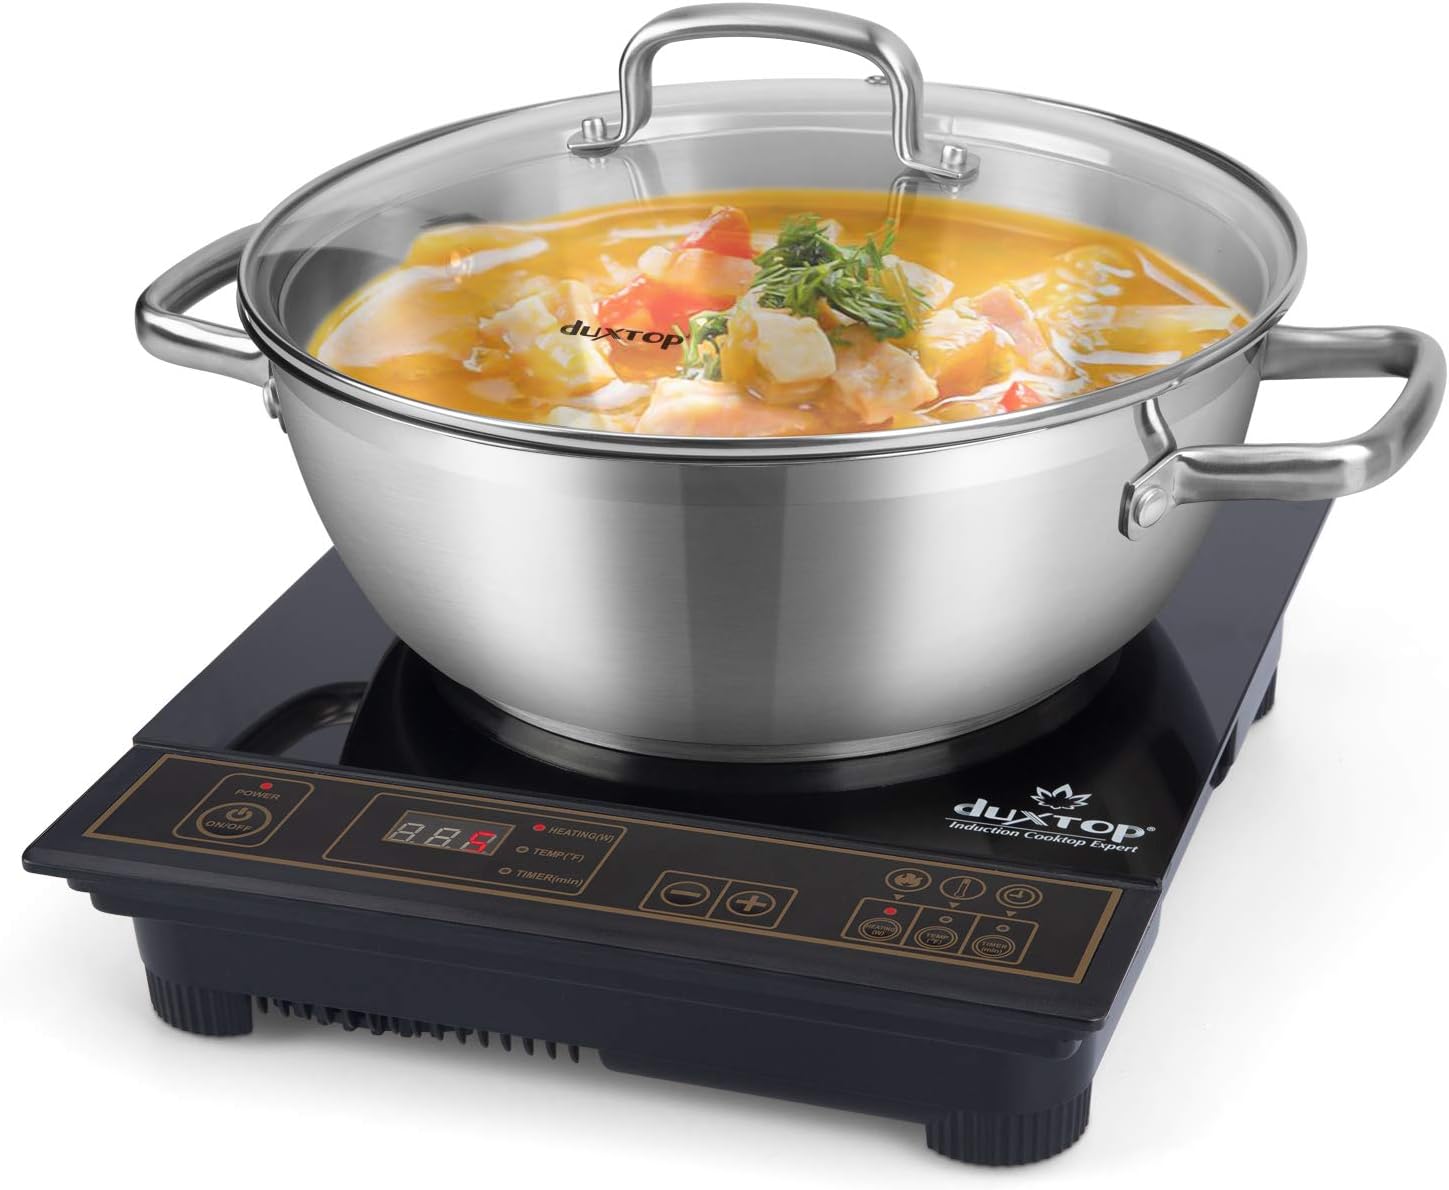 Duxtop LCD 1800W Portable Induction Cooktop 2 Burner, Built-In